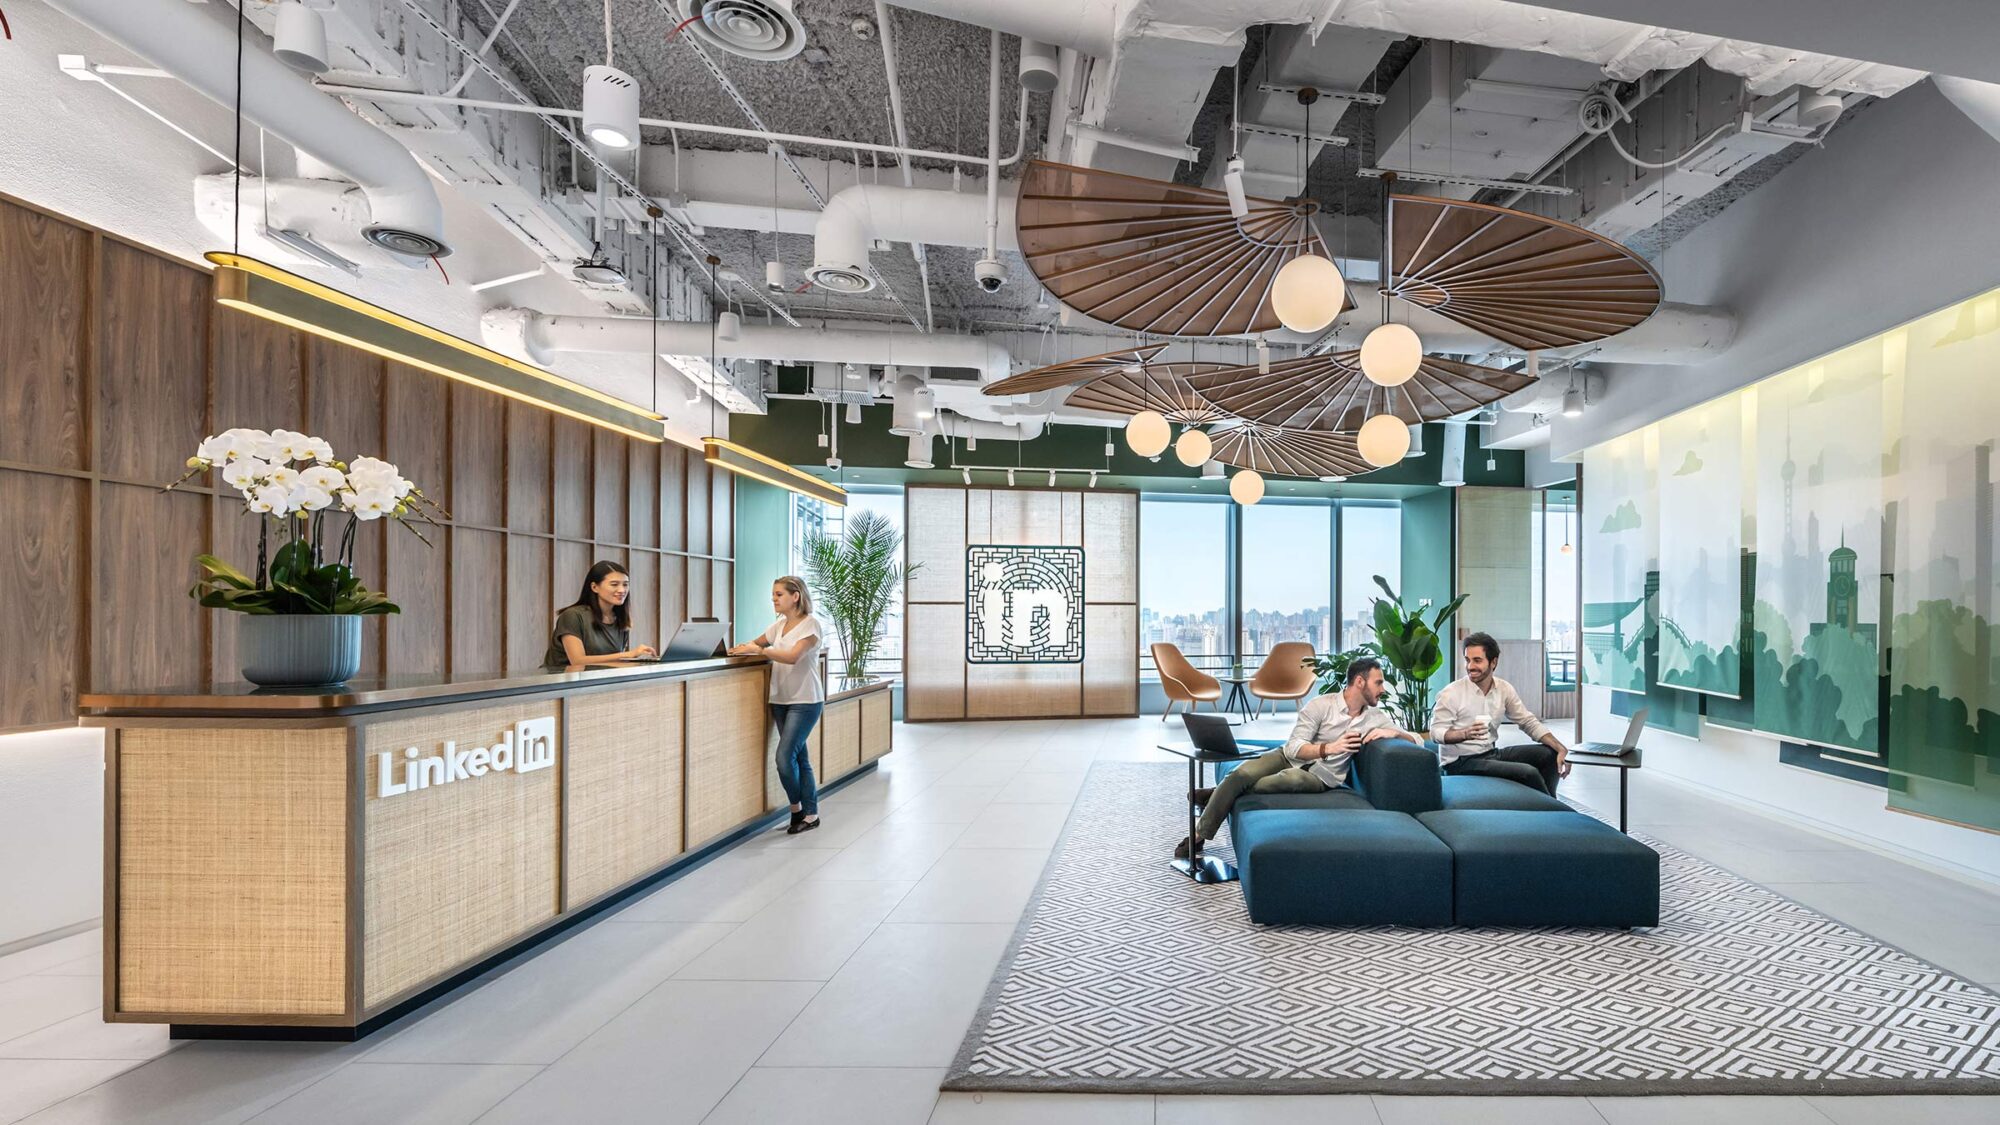 LinkedIn-Shanghai-workplace-reception-casual-seating-plants-collaboration2